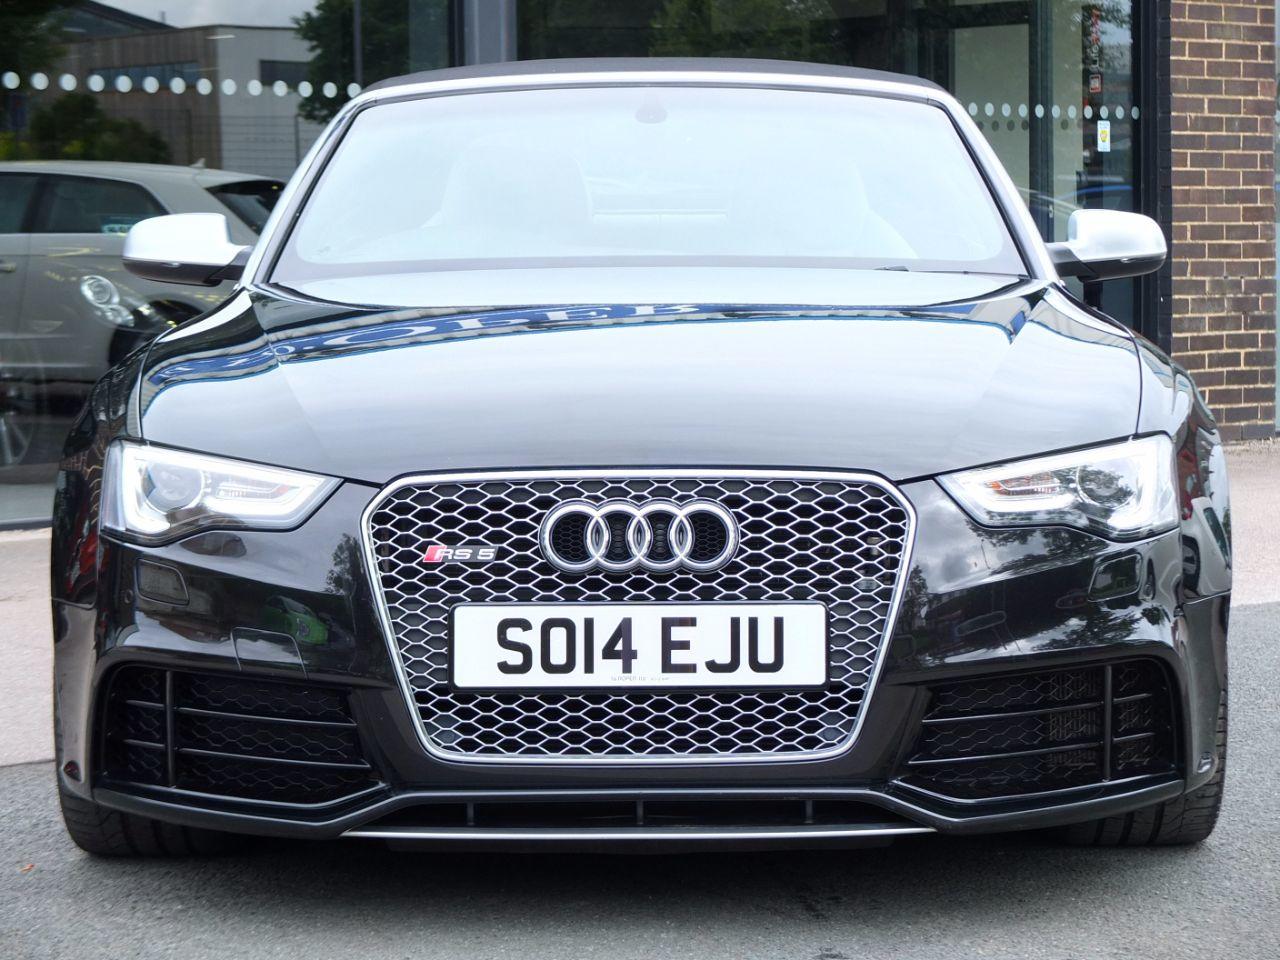 Audi RS5 Cabriolet 4.2 FSI quattro S tronic Convertible Petrol Panther Black Crystal